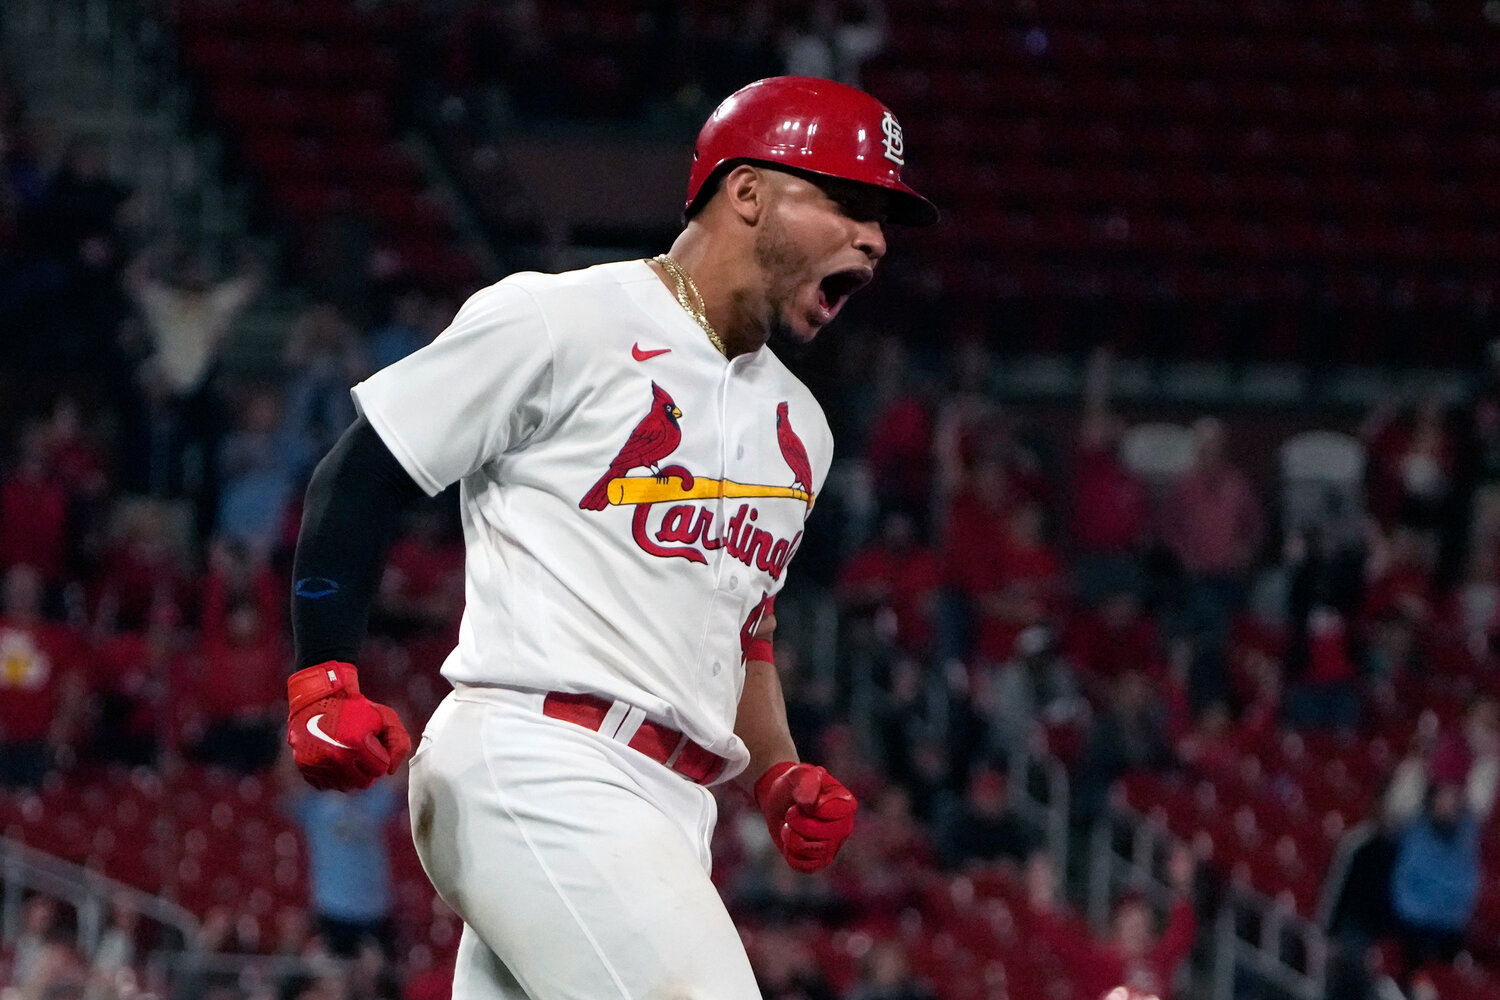 St. Louis Cardinals' Willson Contreras celebrates after hitting a two-run home run during the ninth inning of a baseball game against the Arizona Diamondbacks Tuesday, April 18, 2023, in St. Louis. (AP Photo/Jeff Roberson)